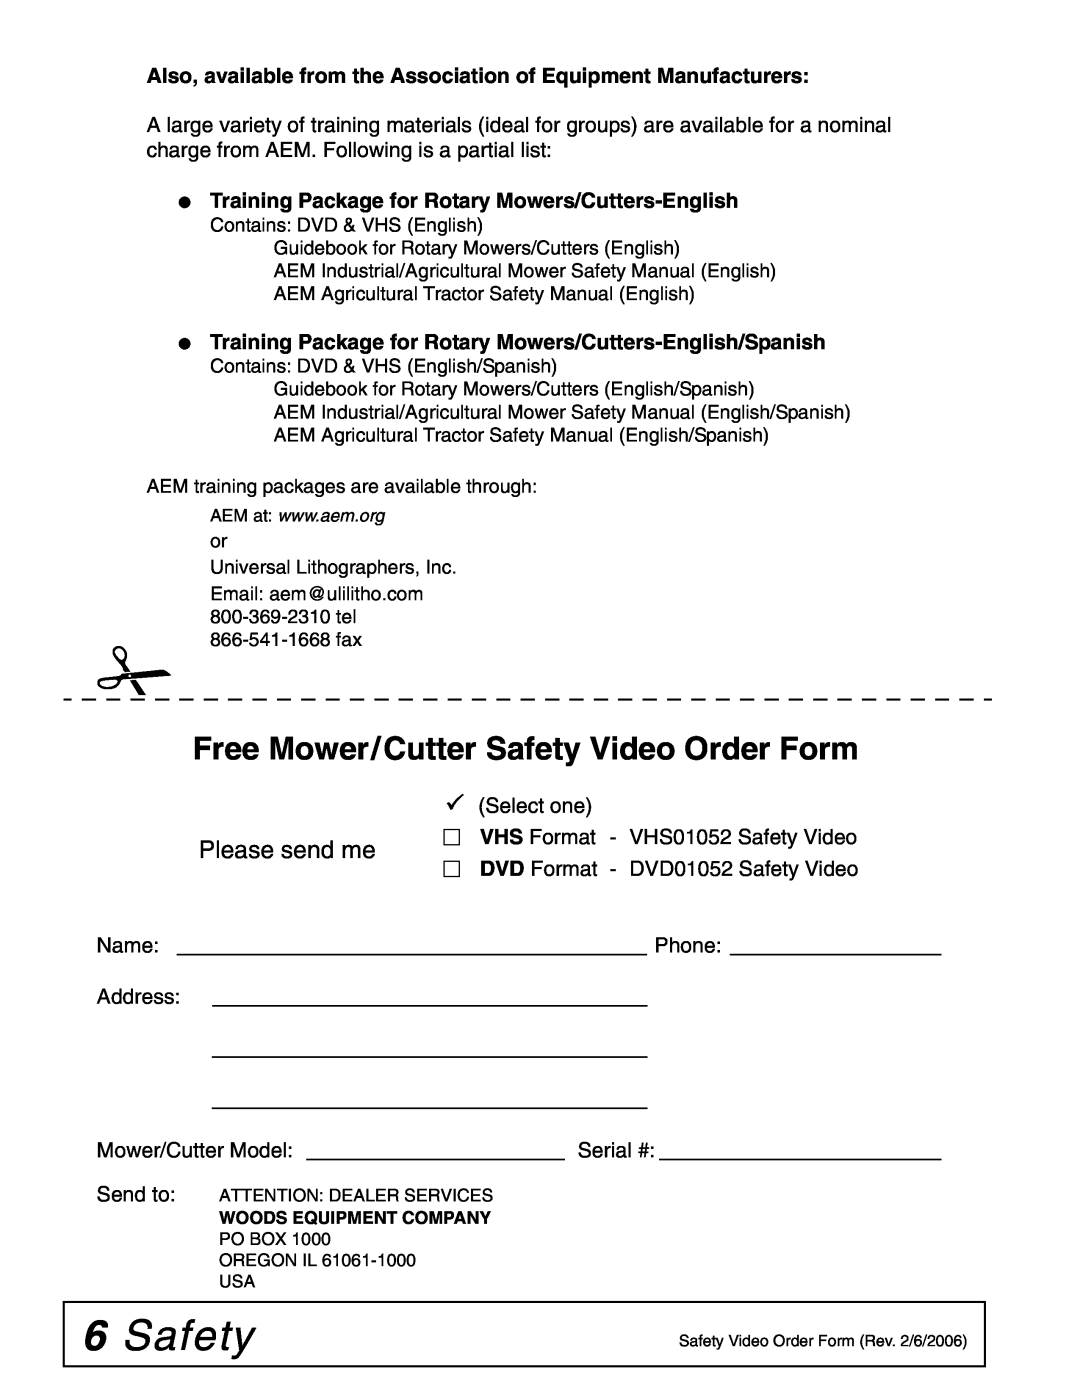 Woods Equipment BB840XP, BB600X, BB720X manual Free Mower/Cutter Safety Video Order Form, Please send me 